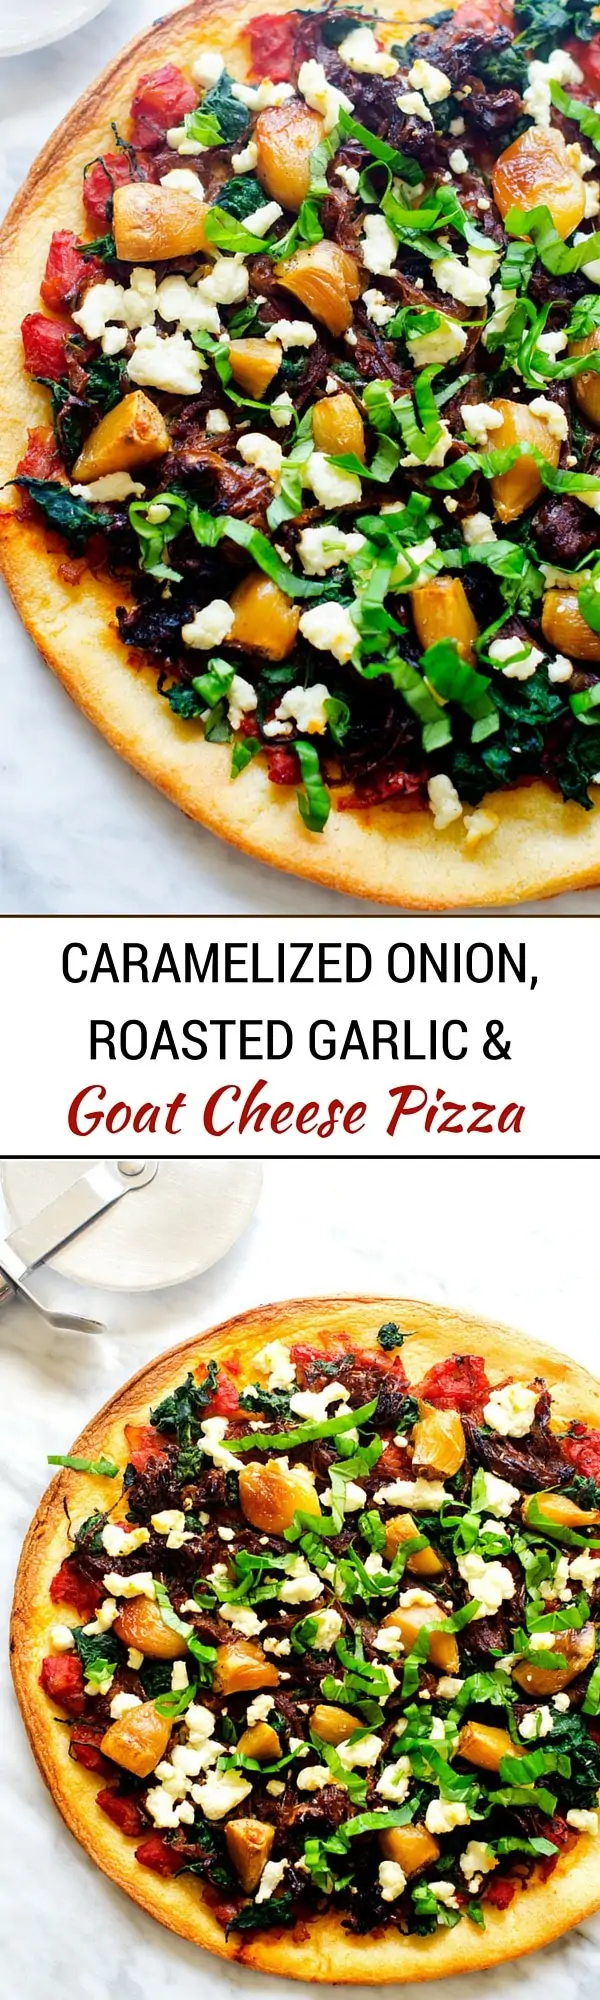 Caramelized Onion, Roasted Garlic & Goat Cheese Pizza - This gluten free pizza comes together in a matter of minutes thanks to these easy freezer hacks! #YesYouCan - Vegan Option - WendyPolisi.com